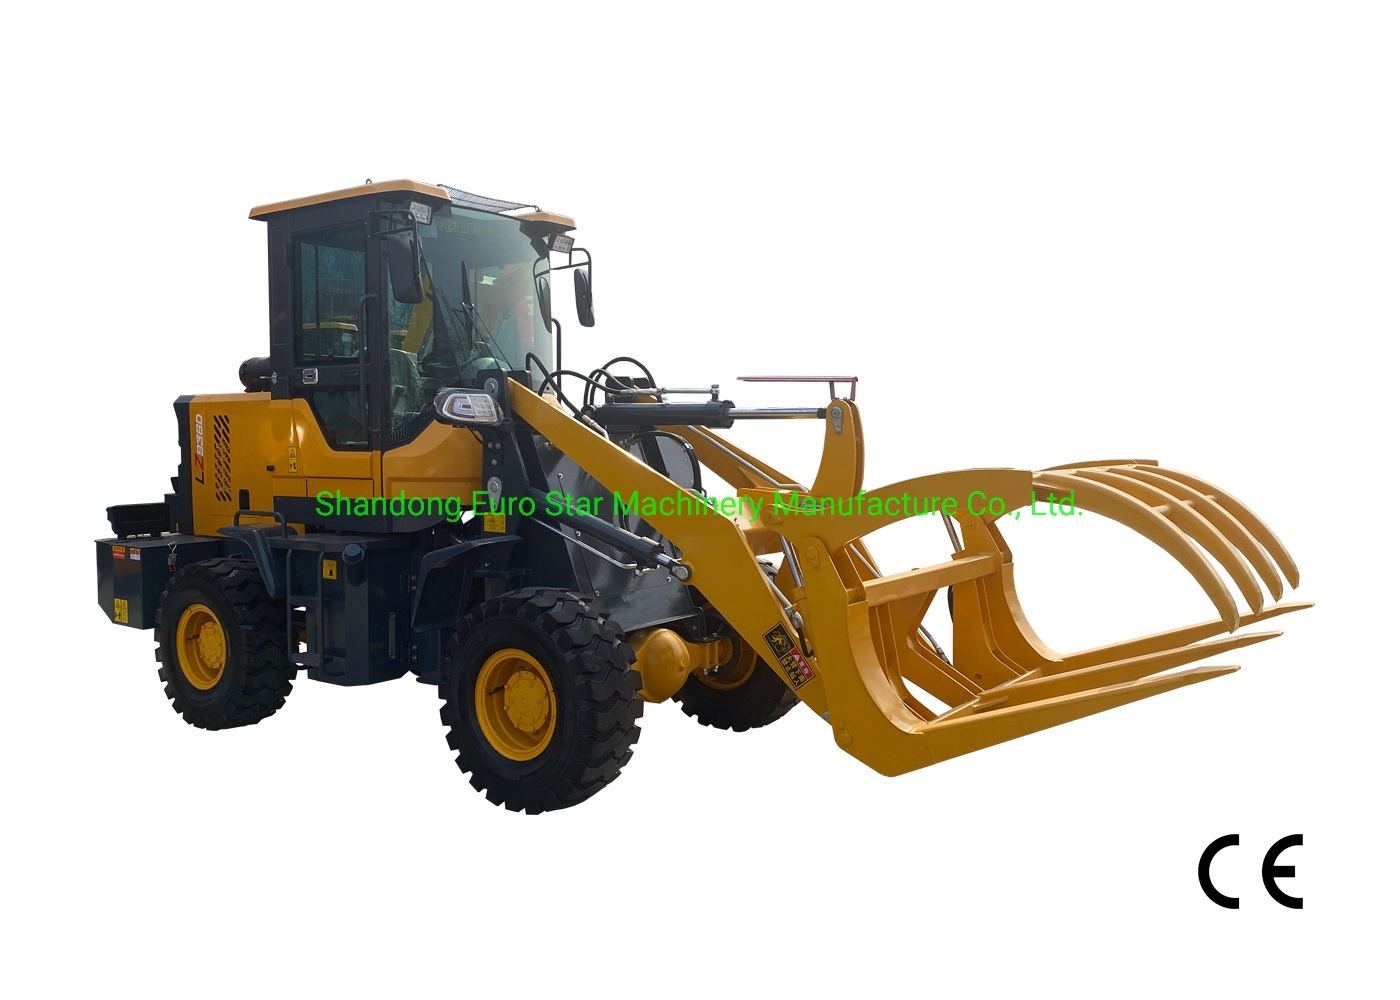 1-6t-Ez936-Wheel-Loader-Multi-Functional-Mini-Small-CE-Approved-China-Farm-Construction-Medium-Bucket-Machinery-Compact-Backhoe-Excavator-Front-End-Loader (1).jpg